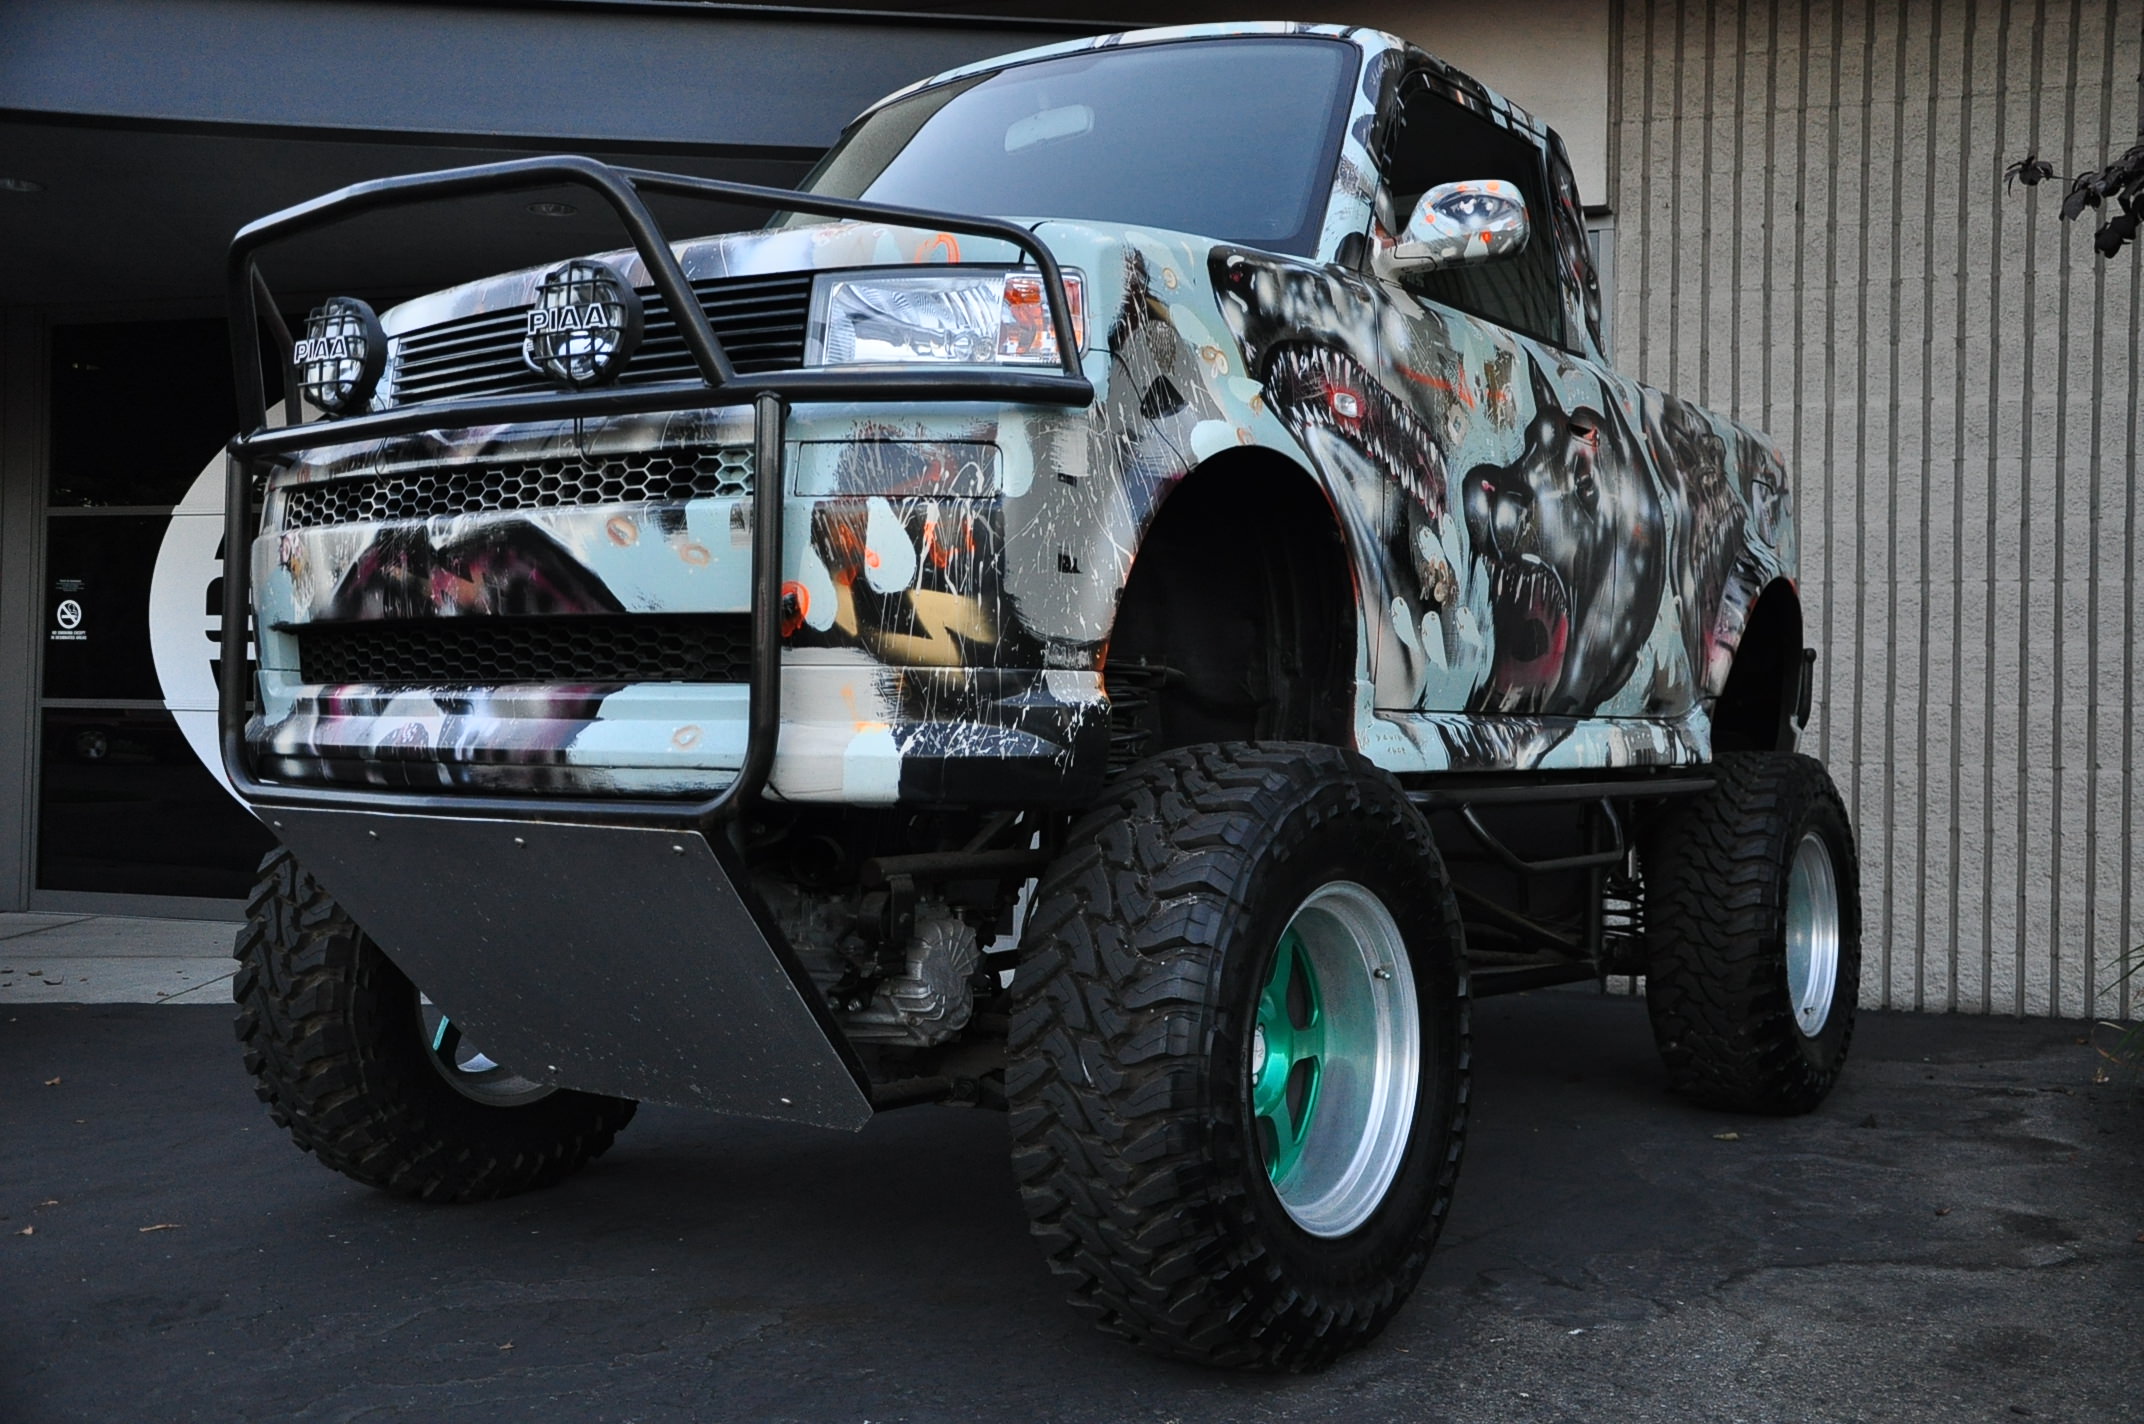 Completely Different But Cool: Scion Lifted Truck - Off Road Wheels.